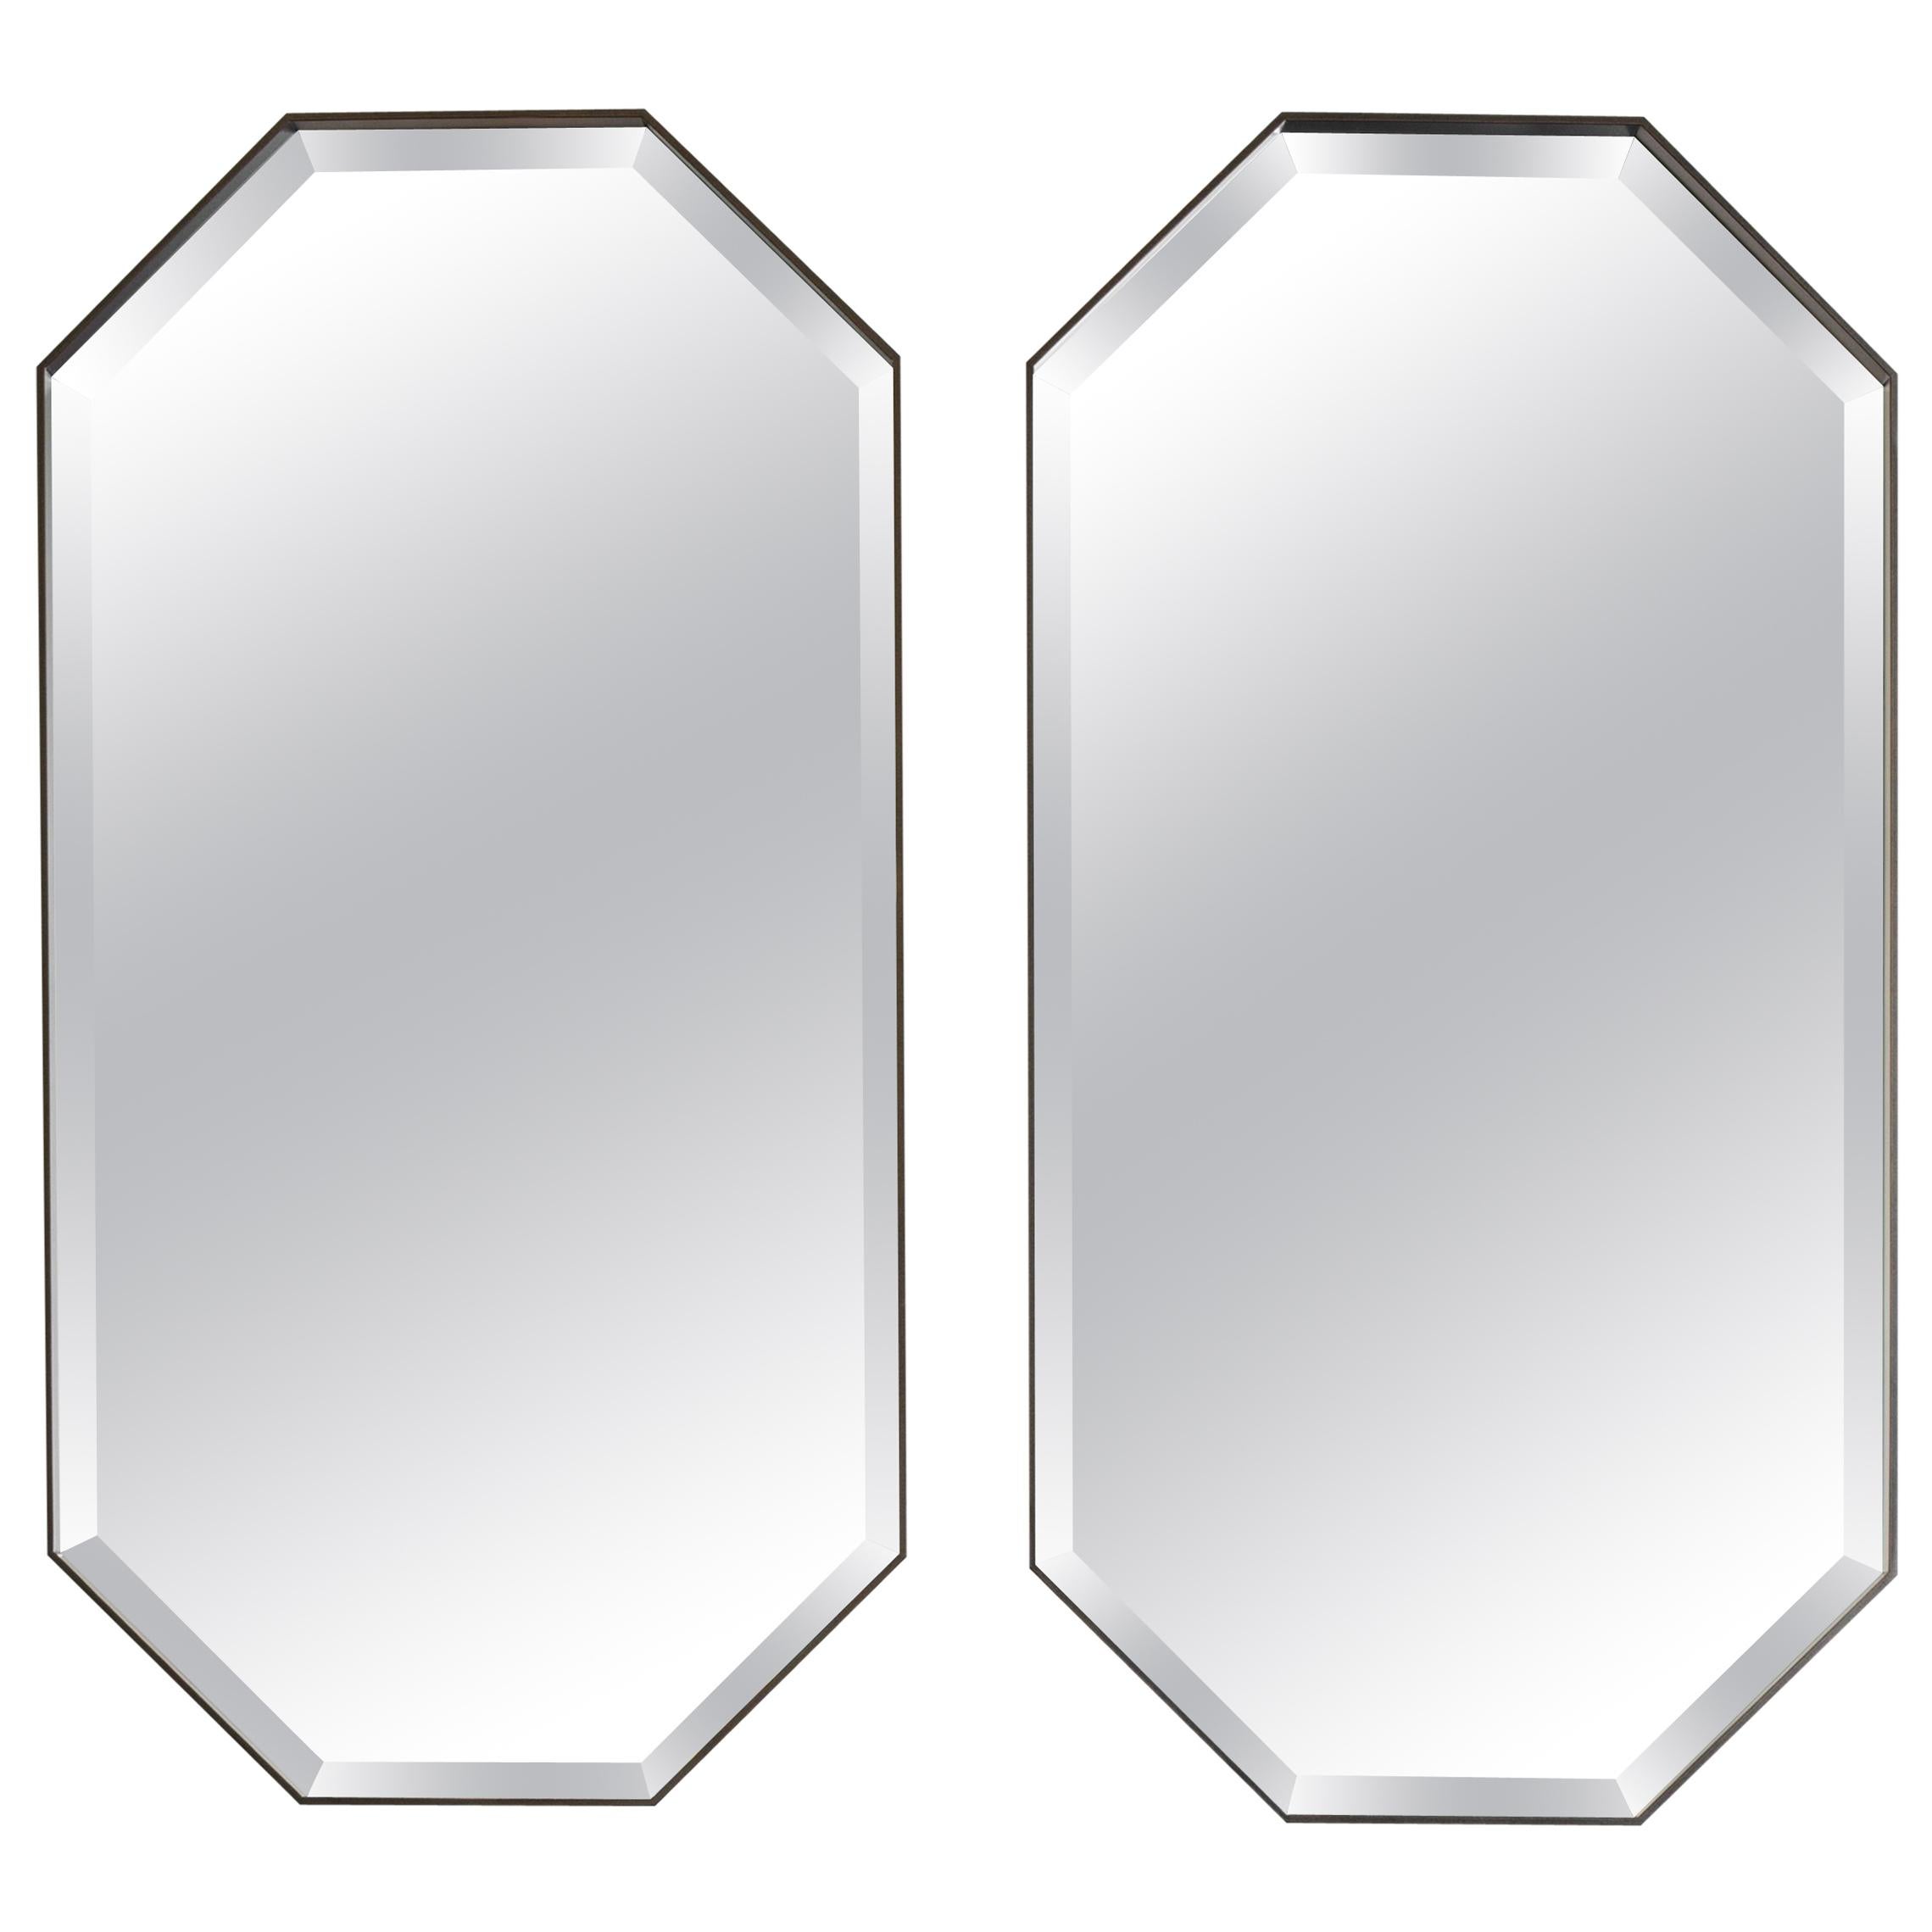 Industrial Chic Style Eros Octagonal Steel Mirrors with Plain or Antique Mirror